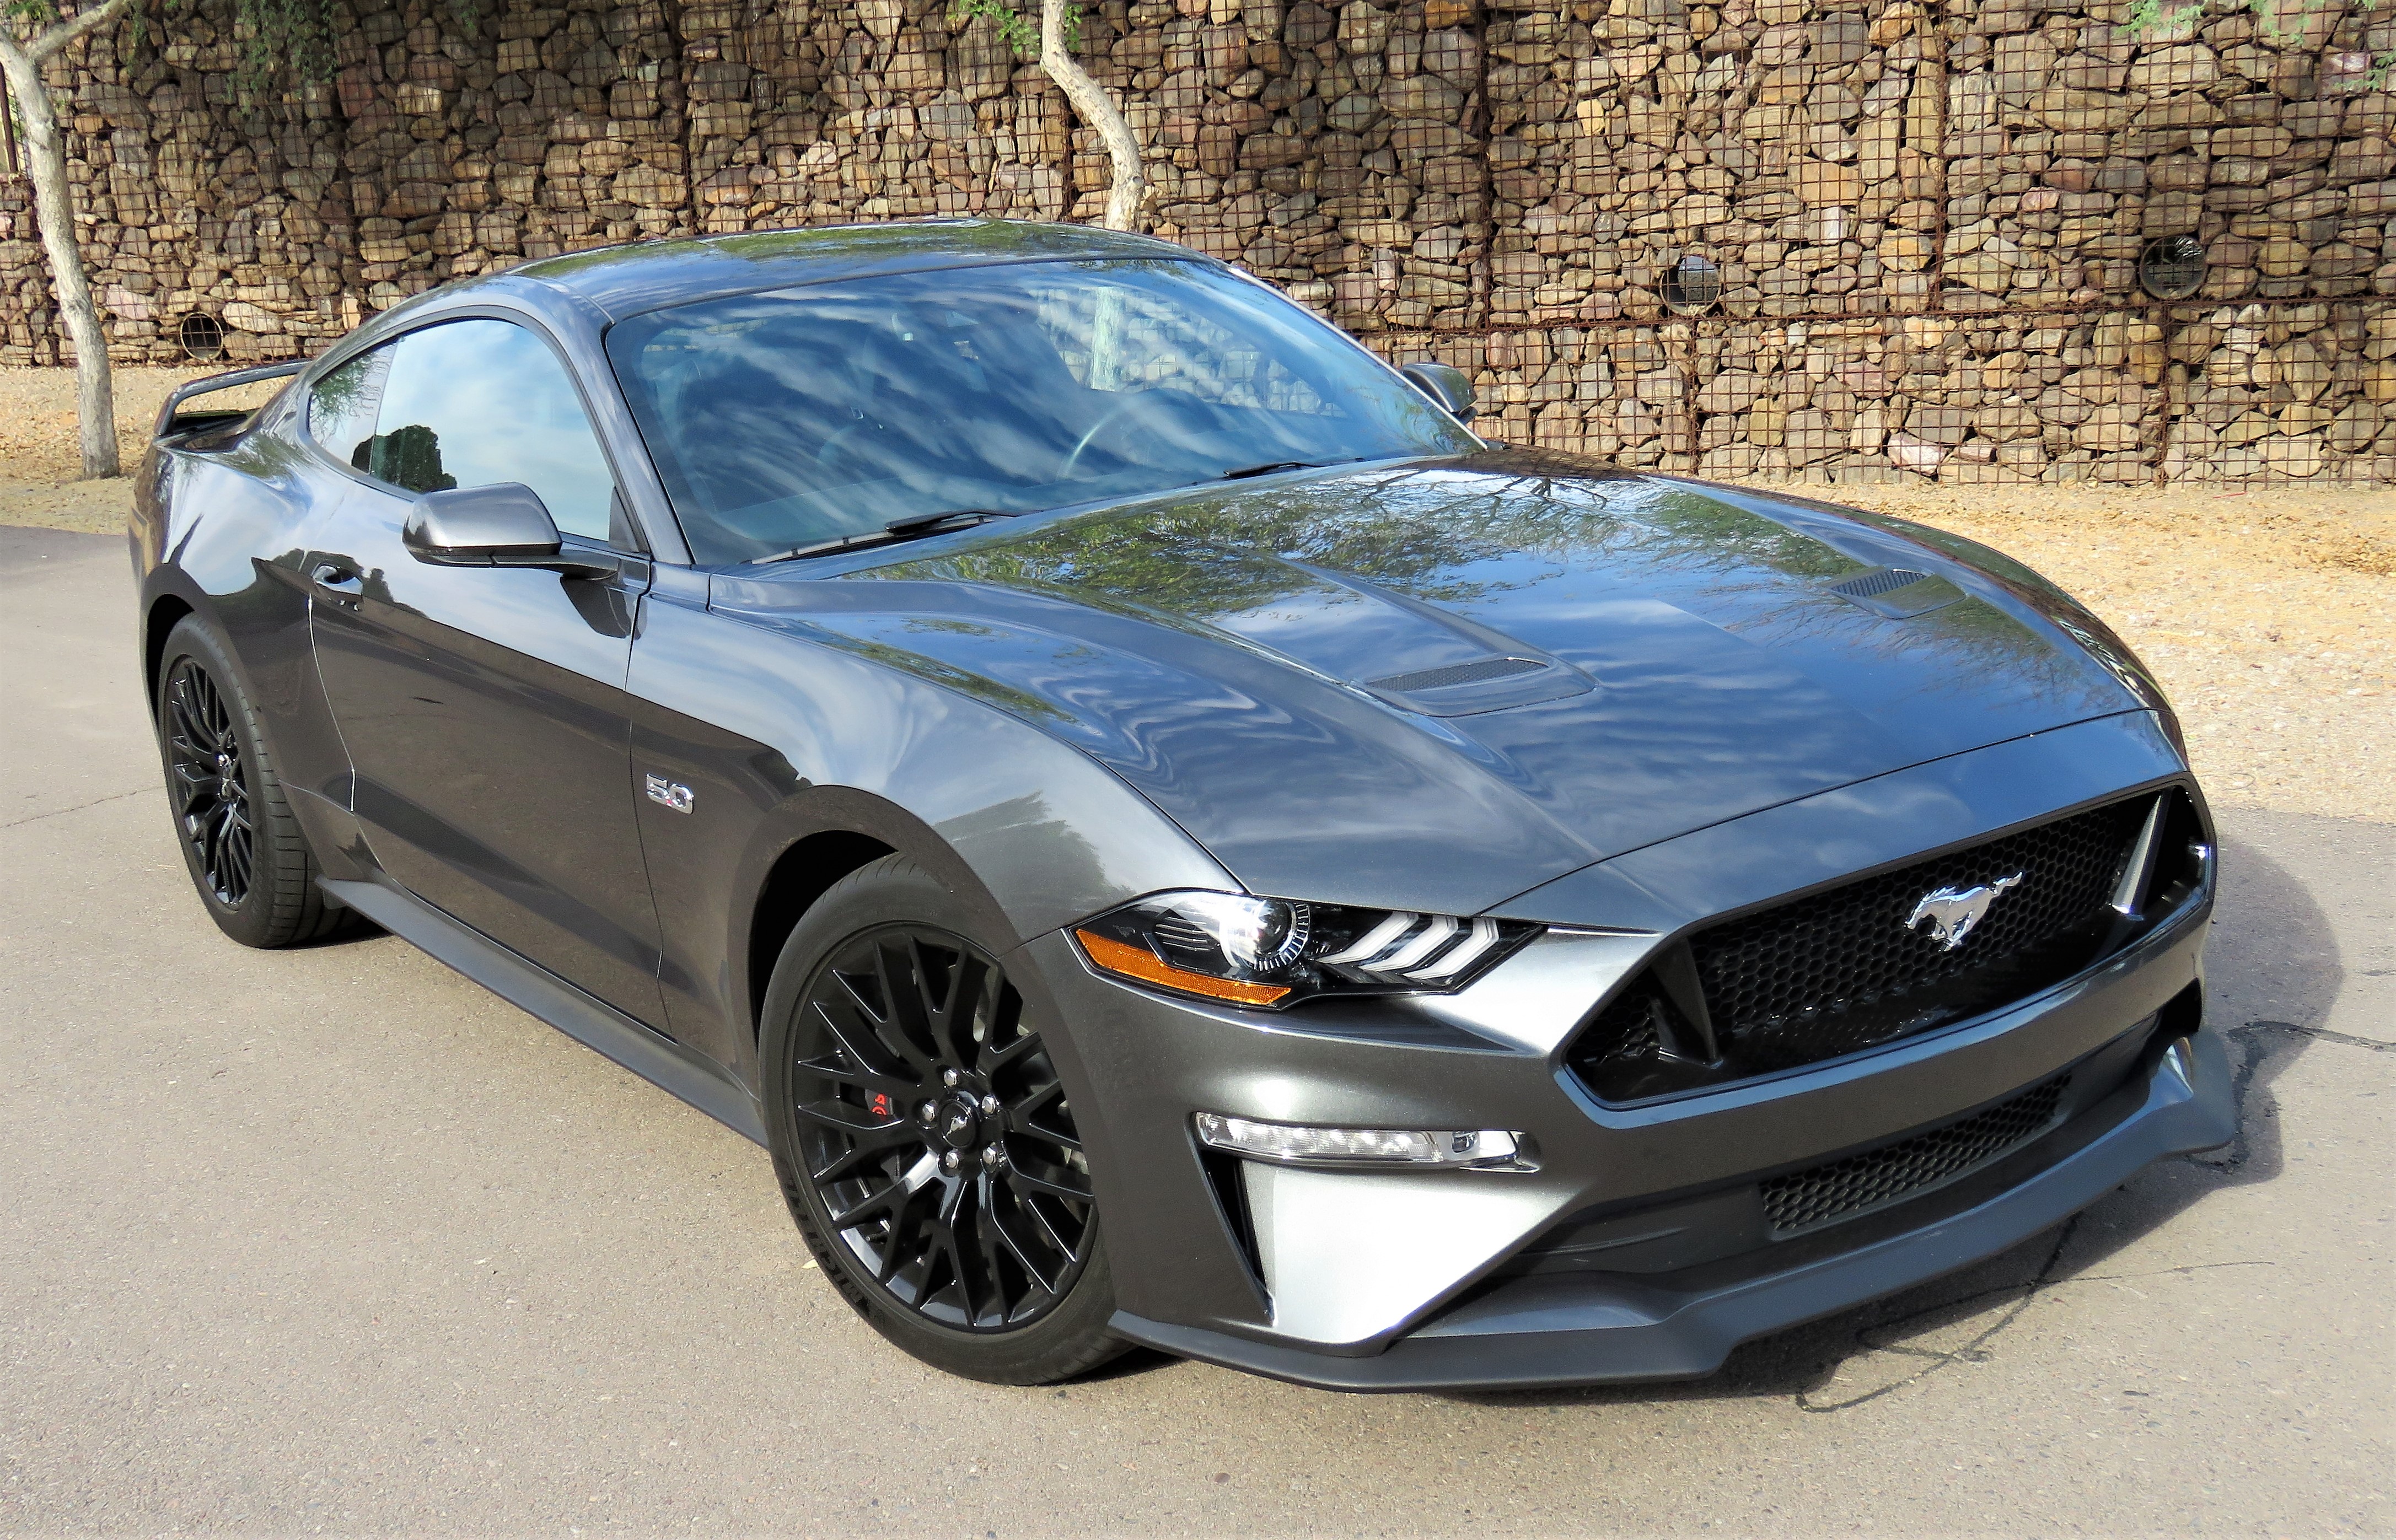 Mustang GT, 2018 Ford Mustang GT coupe strives for all-purpose muscle car, ClassicCars.com Journal